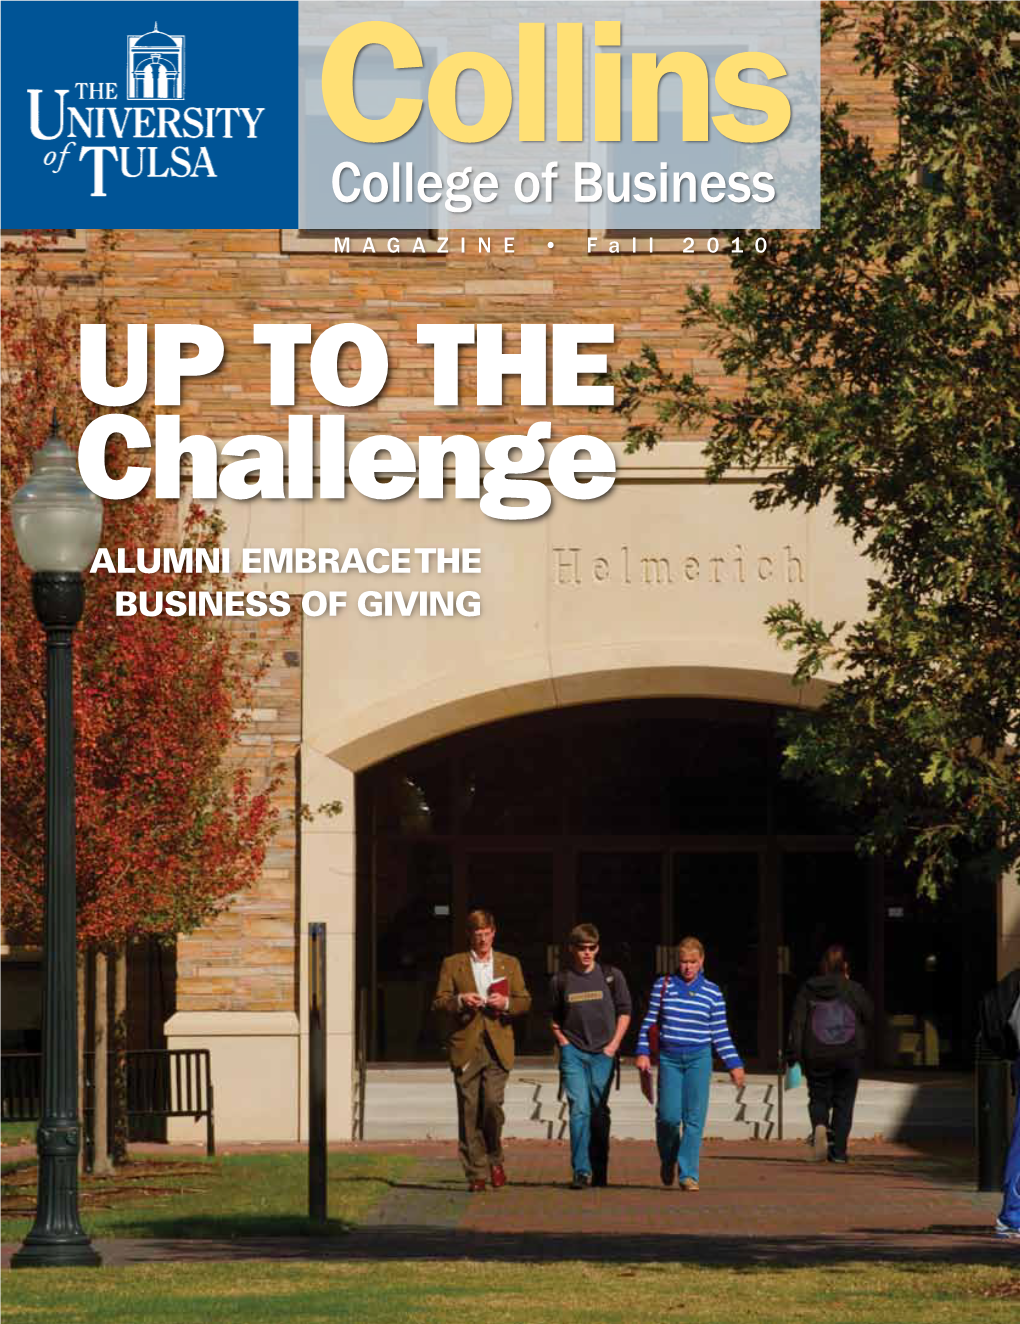 Fall 2010 up to the Challenge ALUMNI EMBRACE the BUSINESS of GIVING COLLINS COLLEGE of BUSINESS MAGAZINE Fall 2010 CONTENTS